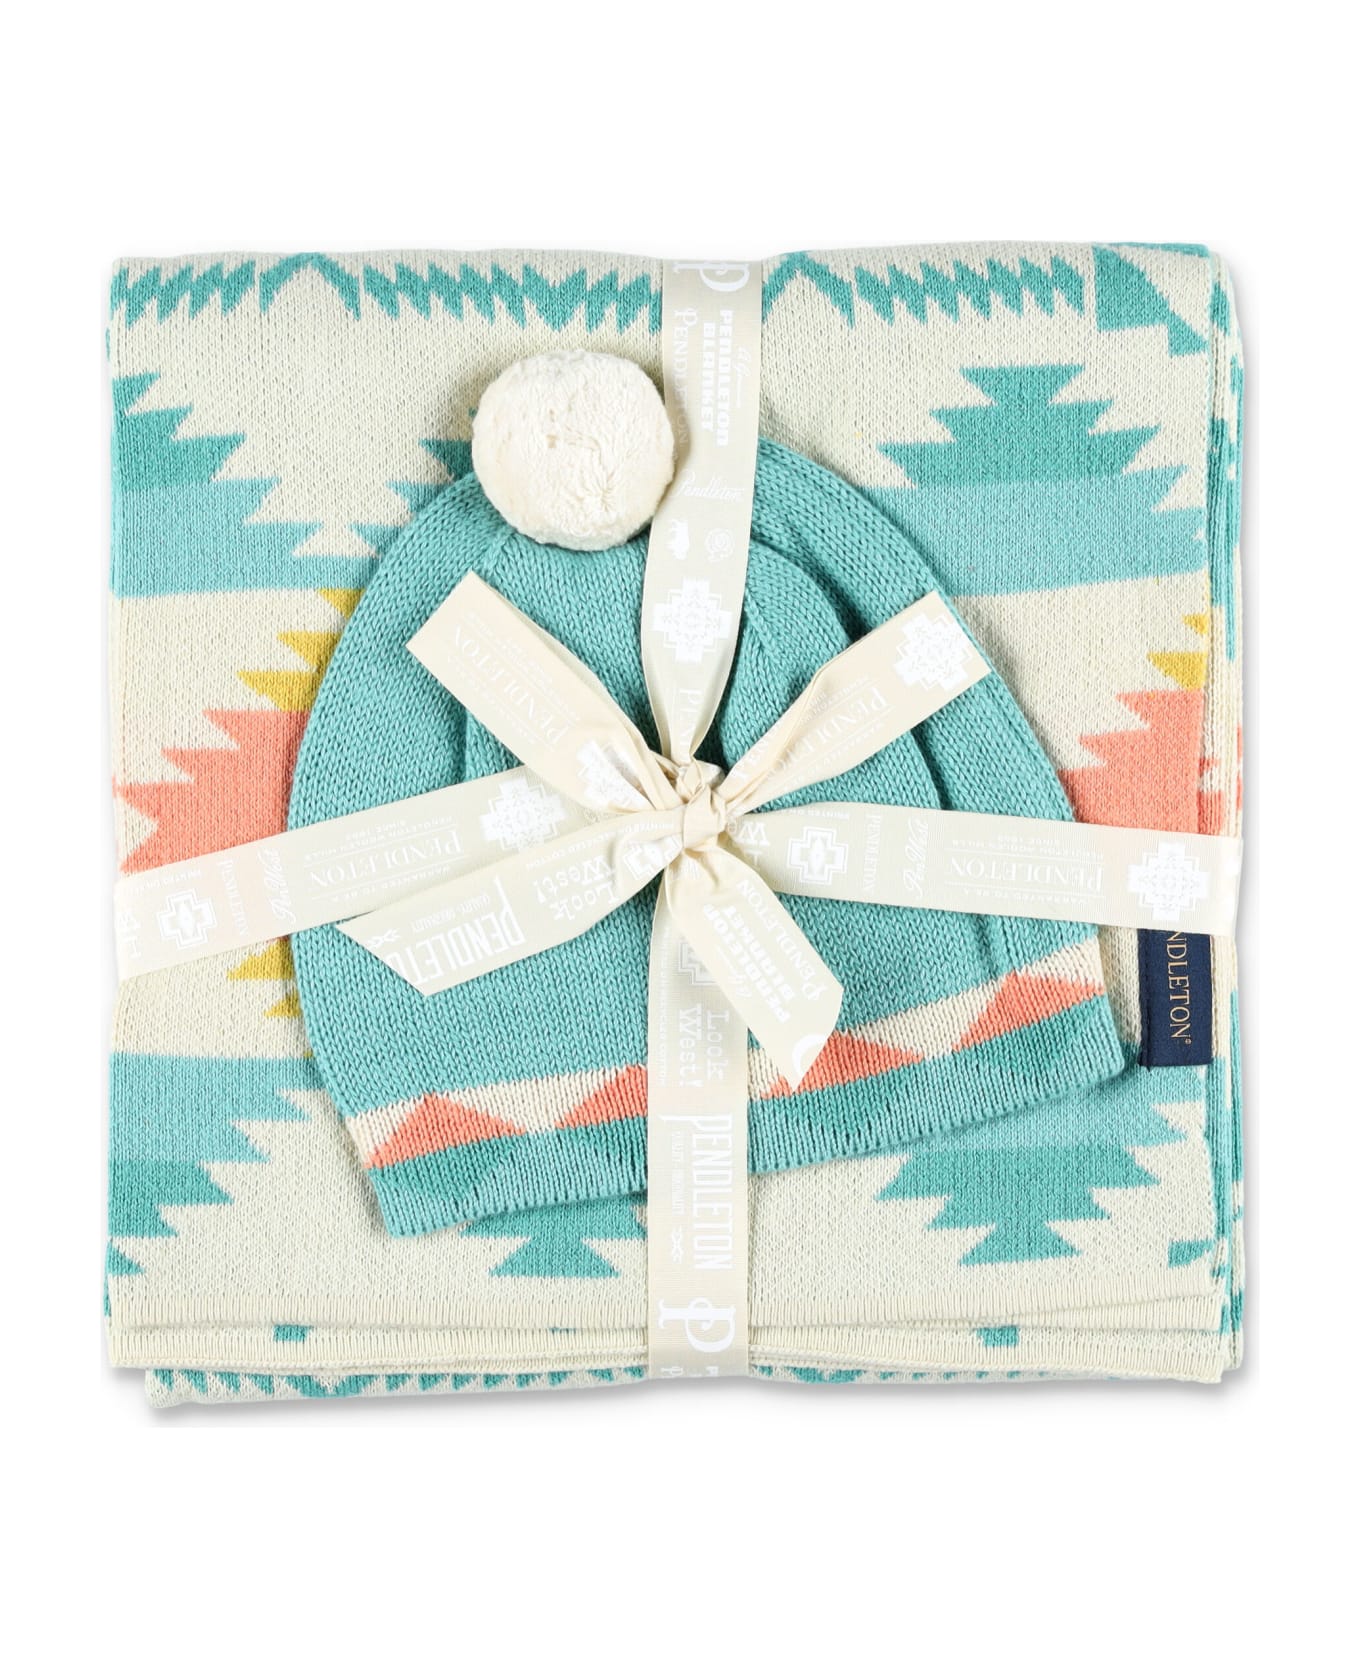 Pendleton Knit Baby Blanket With Beanie - FALCON COVE アクセサリー＆ギフト